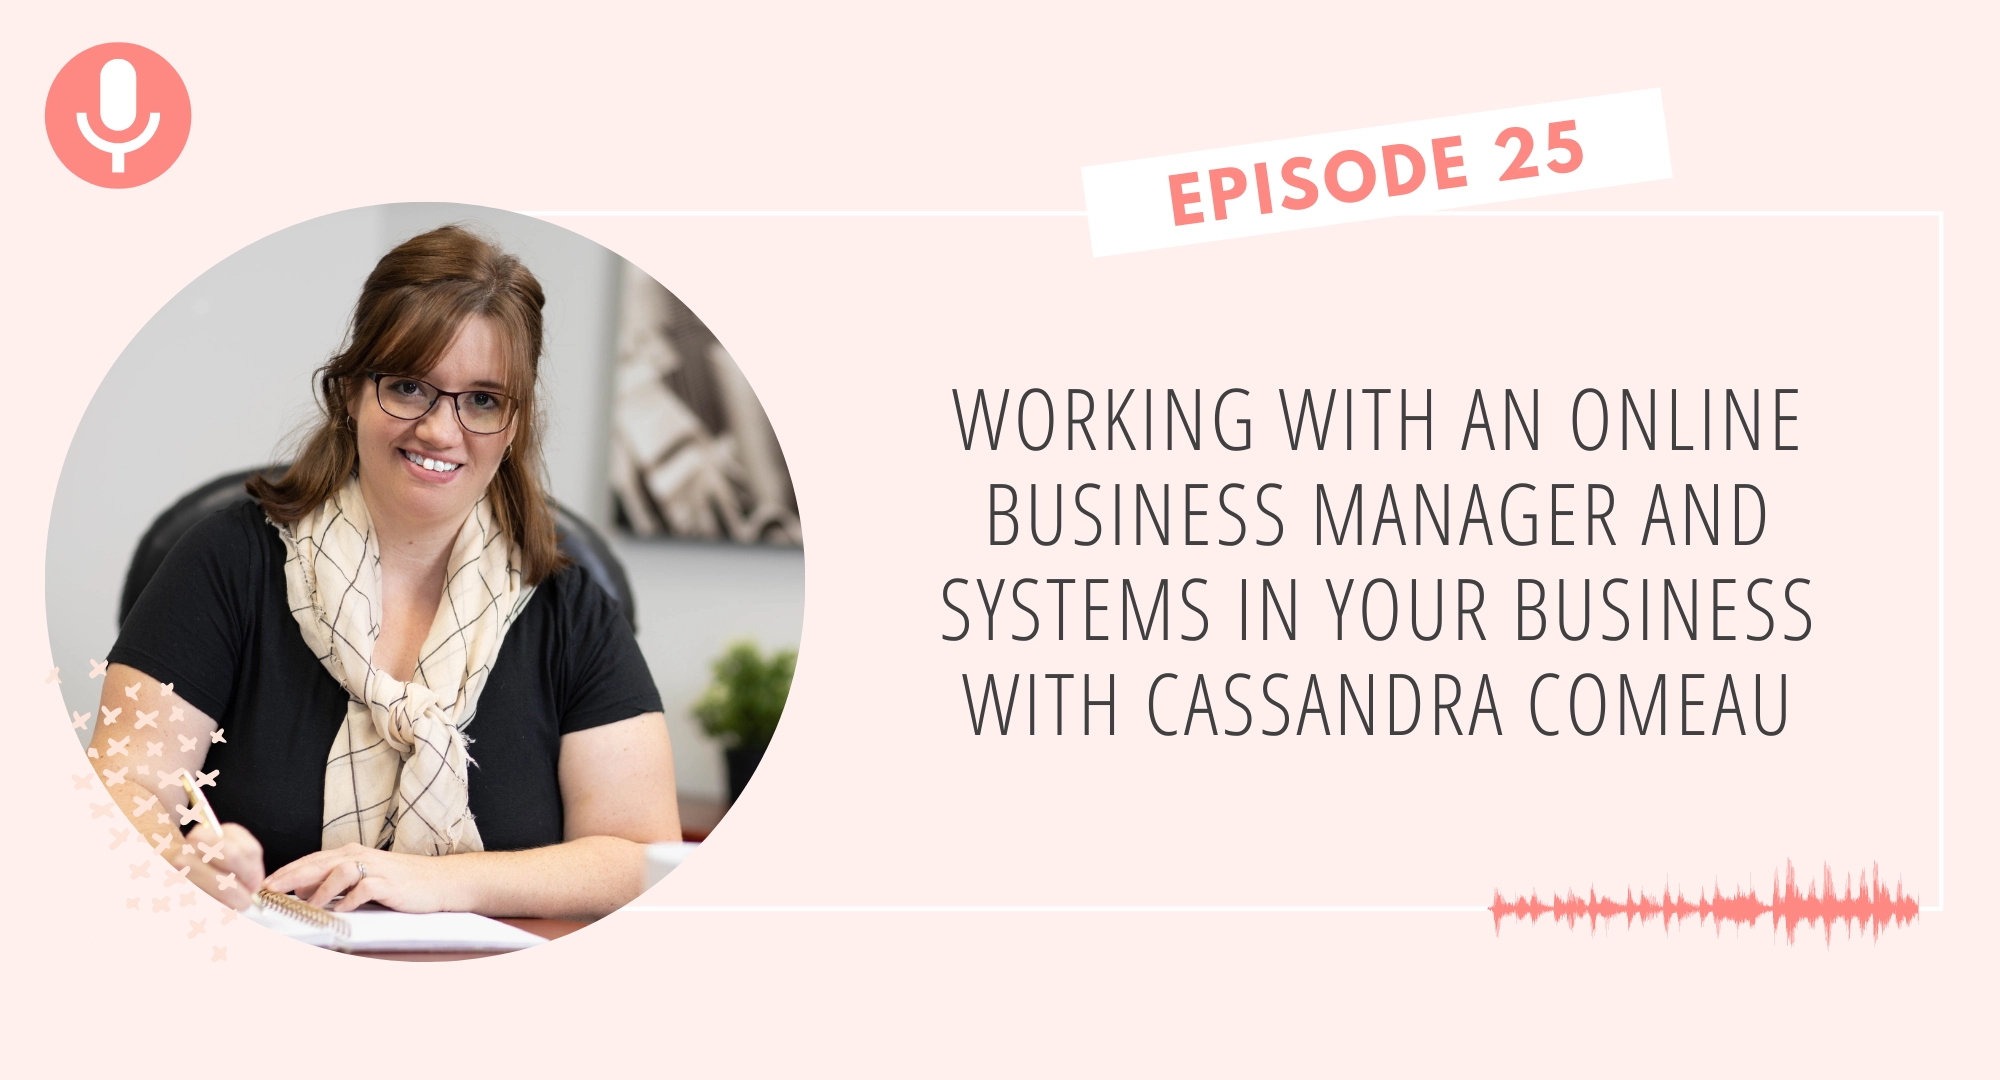 Working with an Online Business Manager and Systems in Your Business with Cassandra Comeau